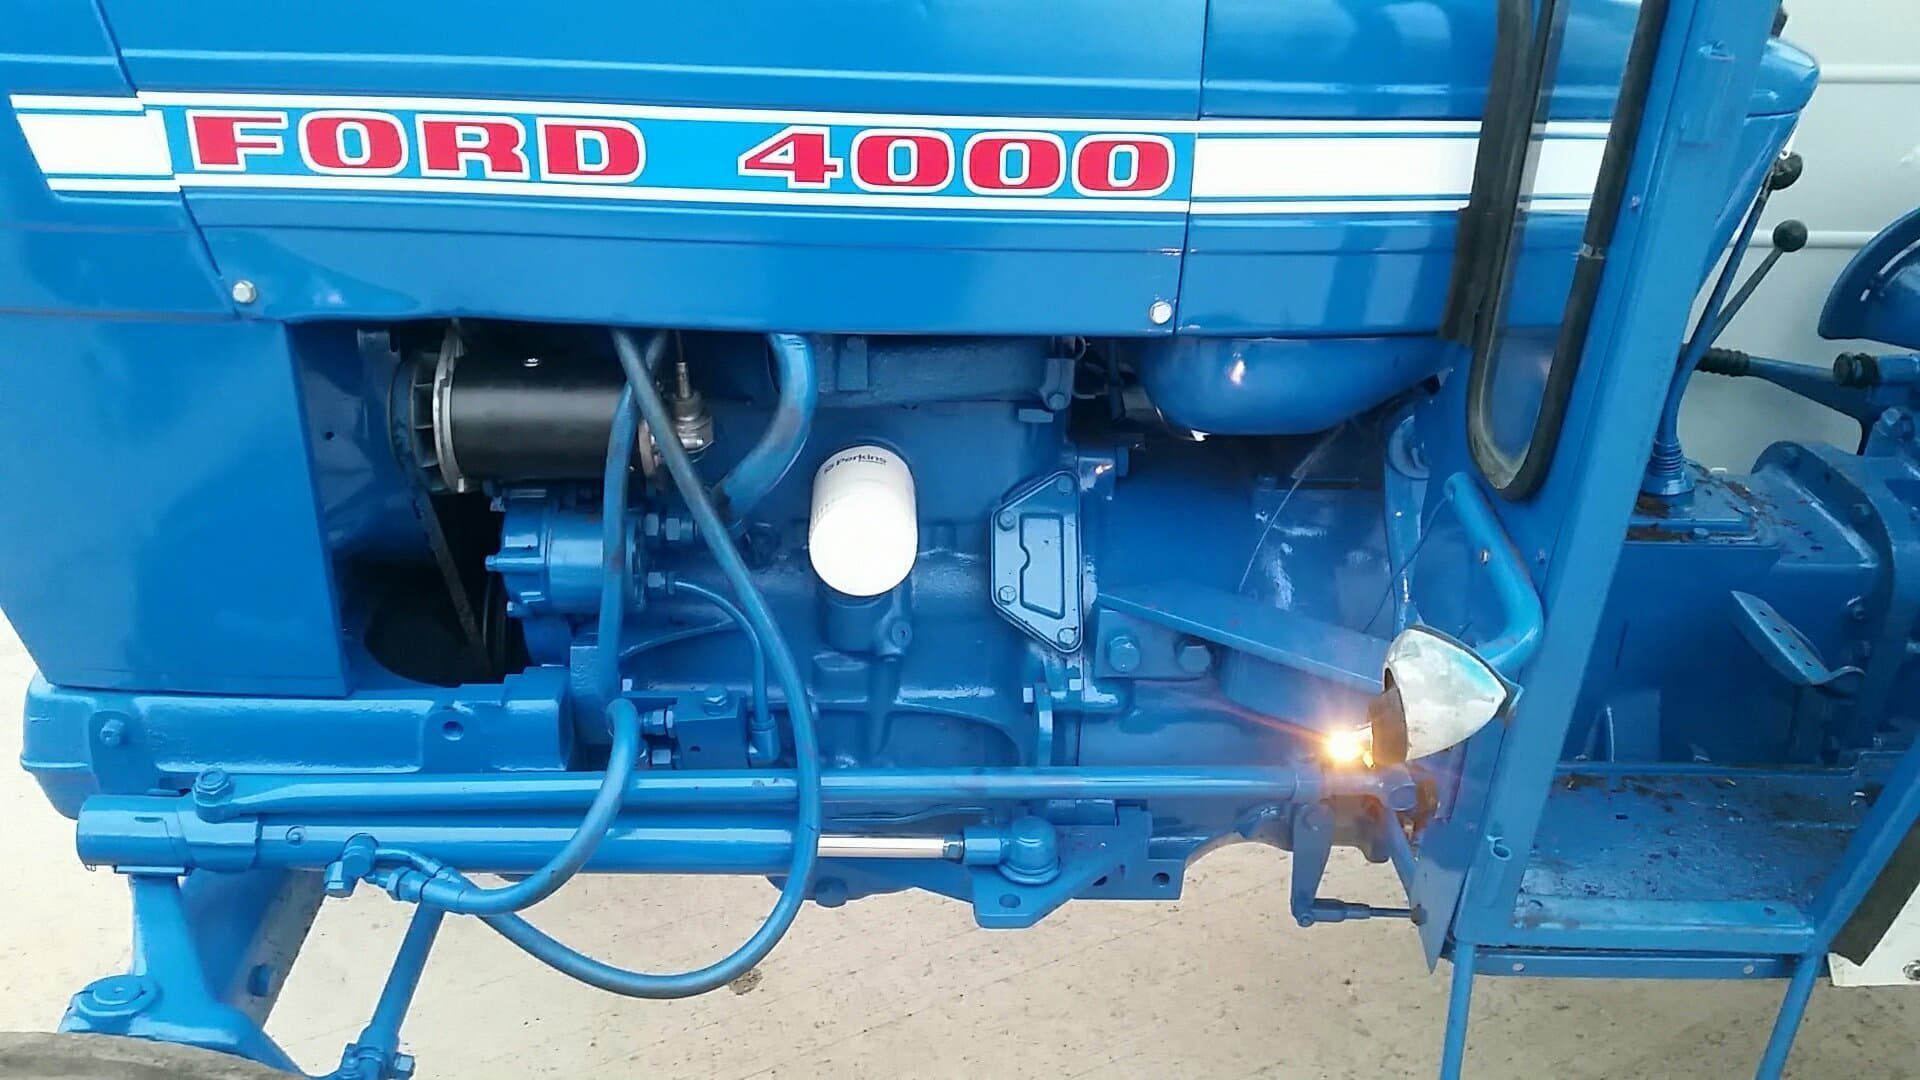 1971 Fully Refurbished Ford 4000 Tractor - Bild 9 aus 10